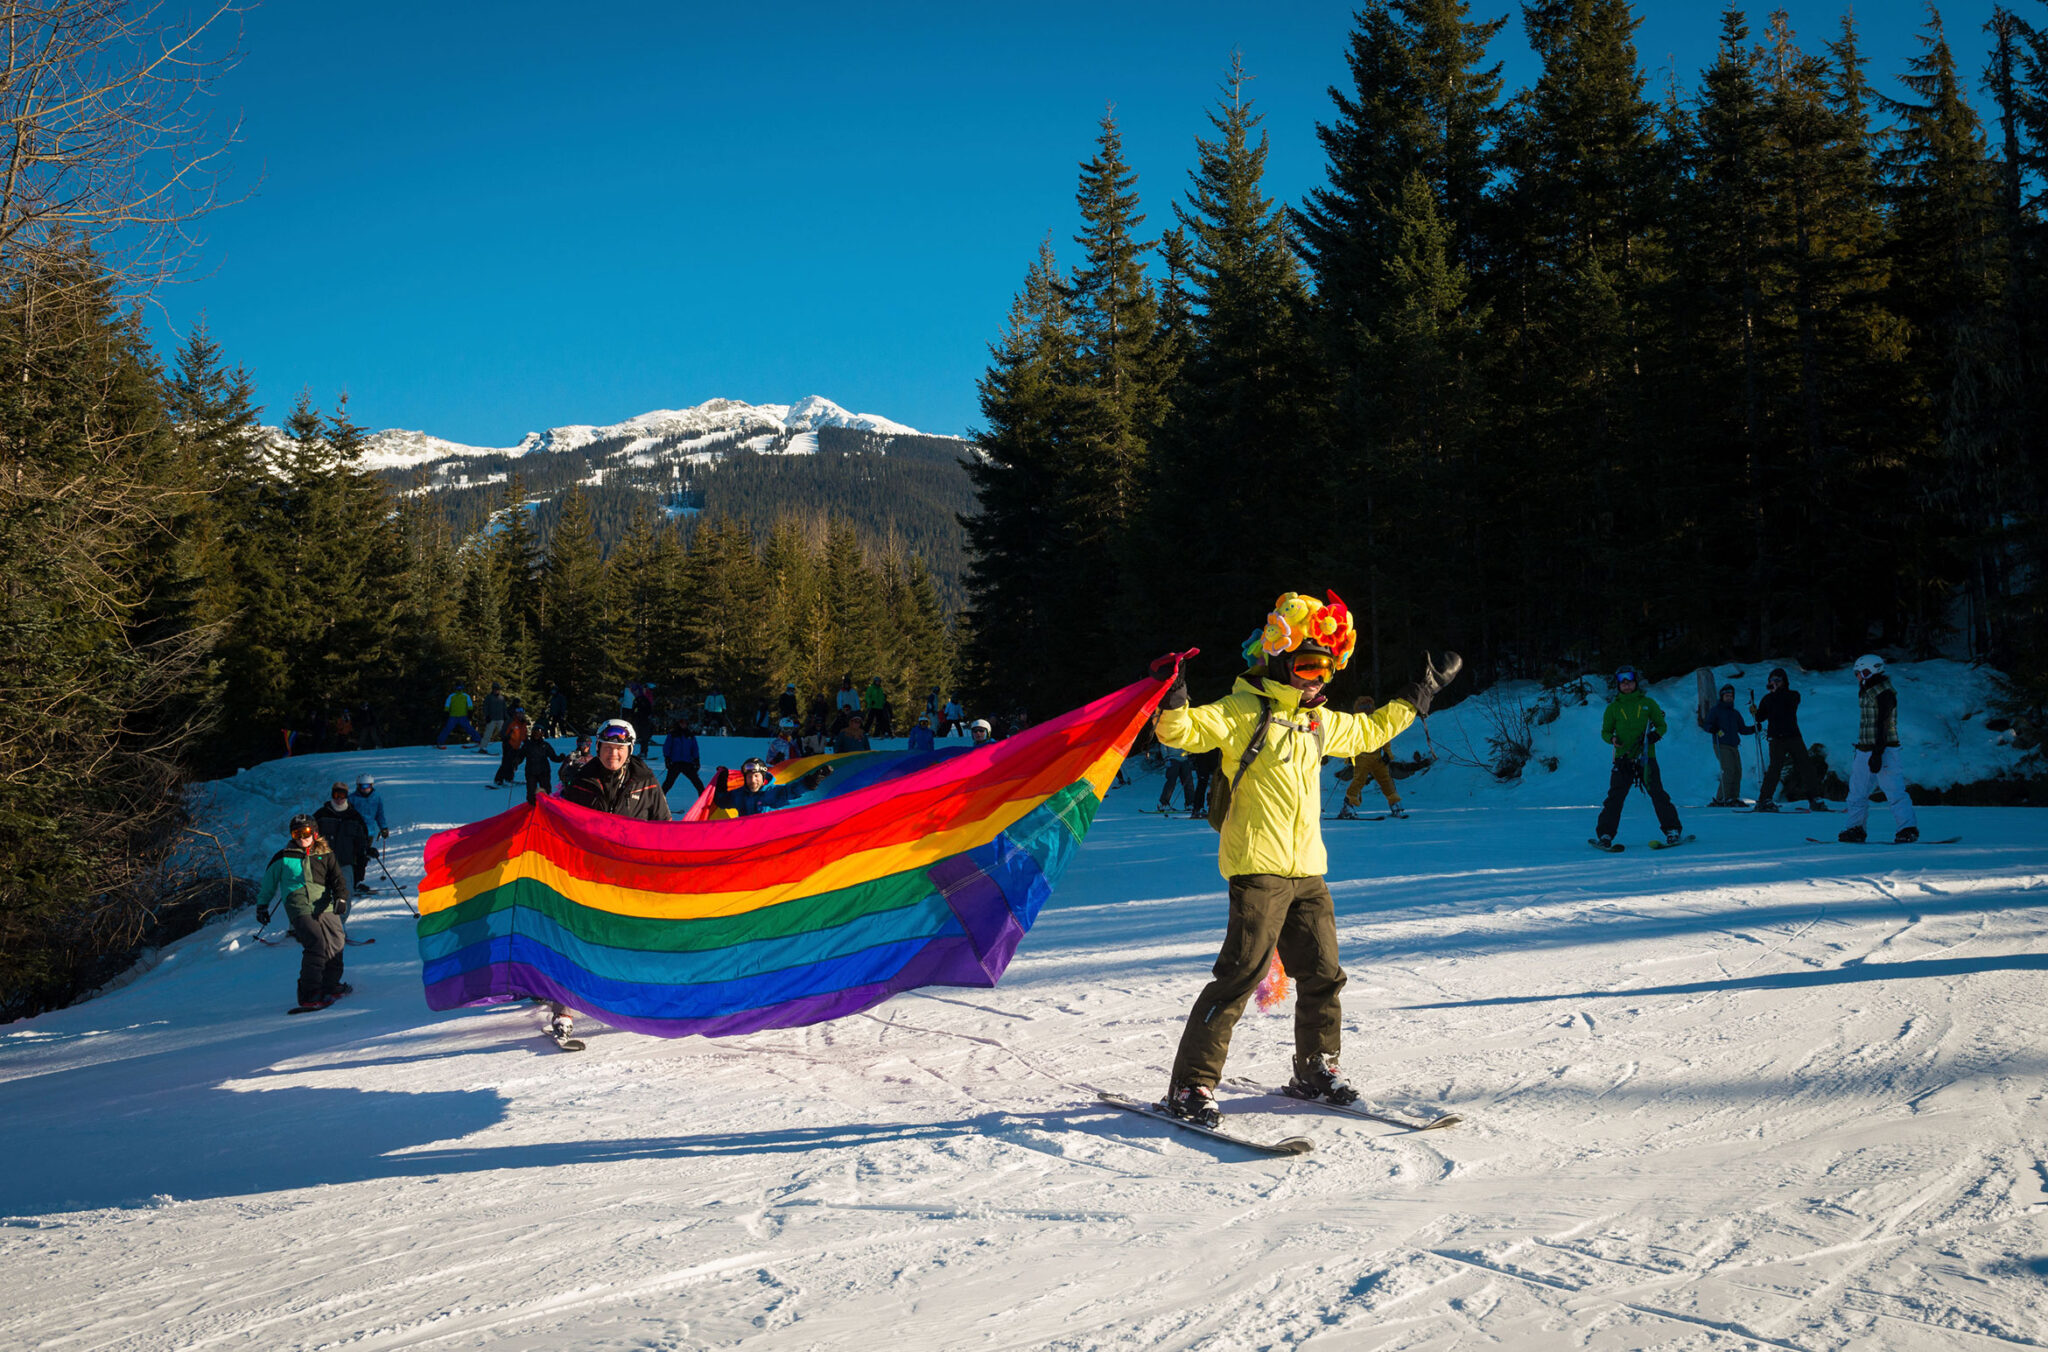 A skier with a balloon headdress makes their way down Whistler Blackcomb's slopes carrying a long rainbow flag to celebrate PRIDE in Whistler.